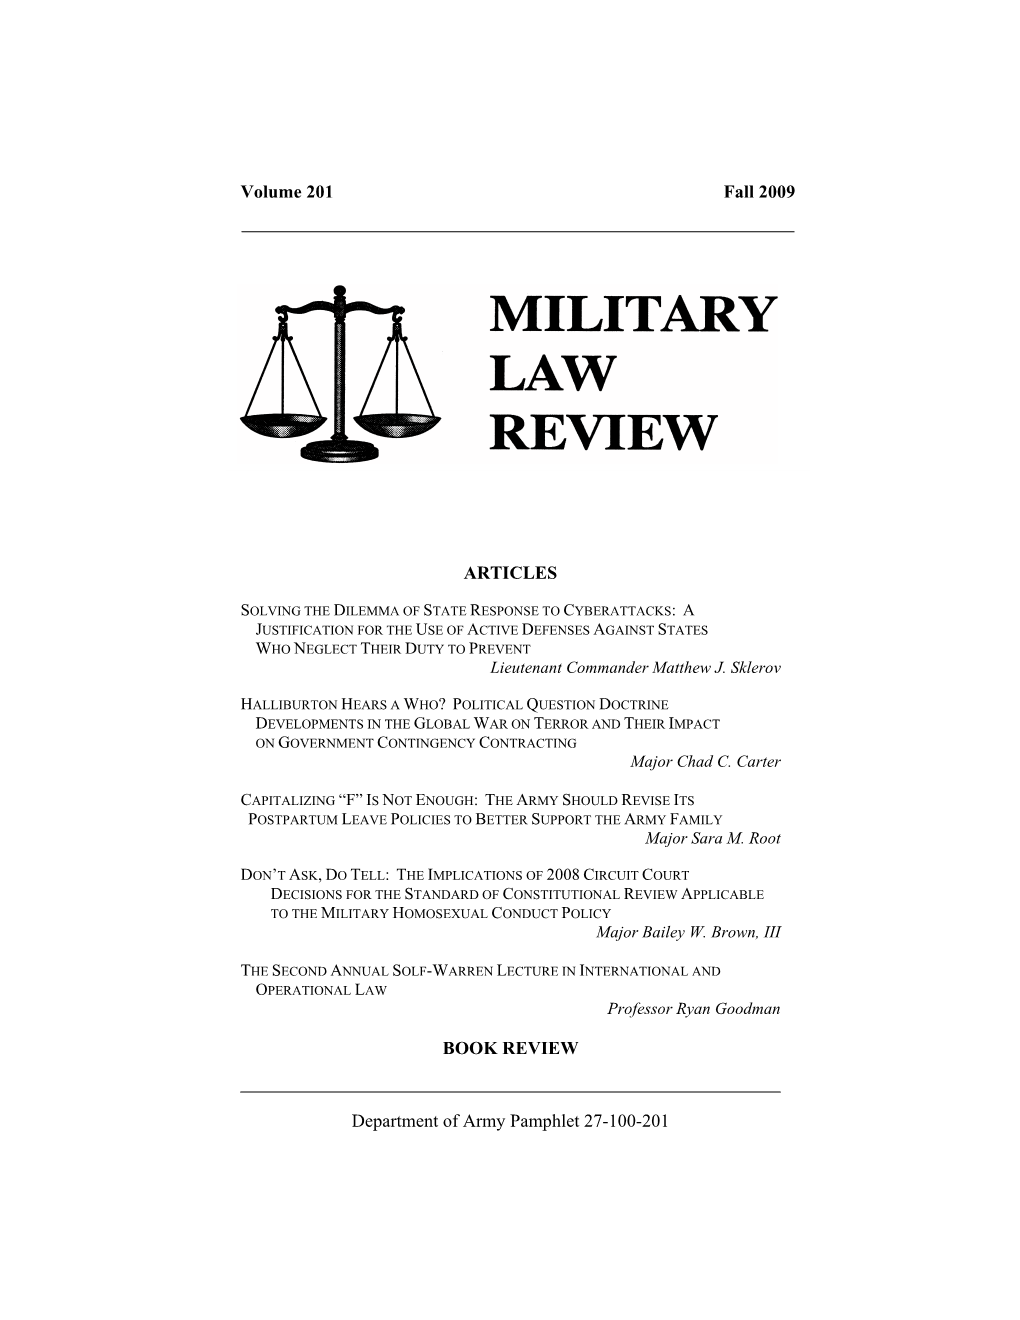 Volume 201 Fall 2009 ARTICLES BOOK REVIEW Department of Army